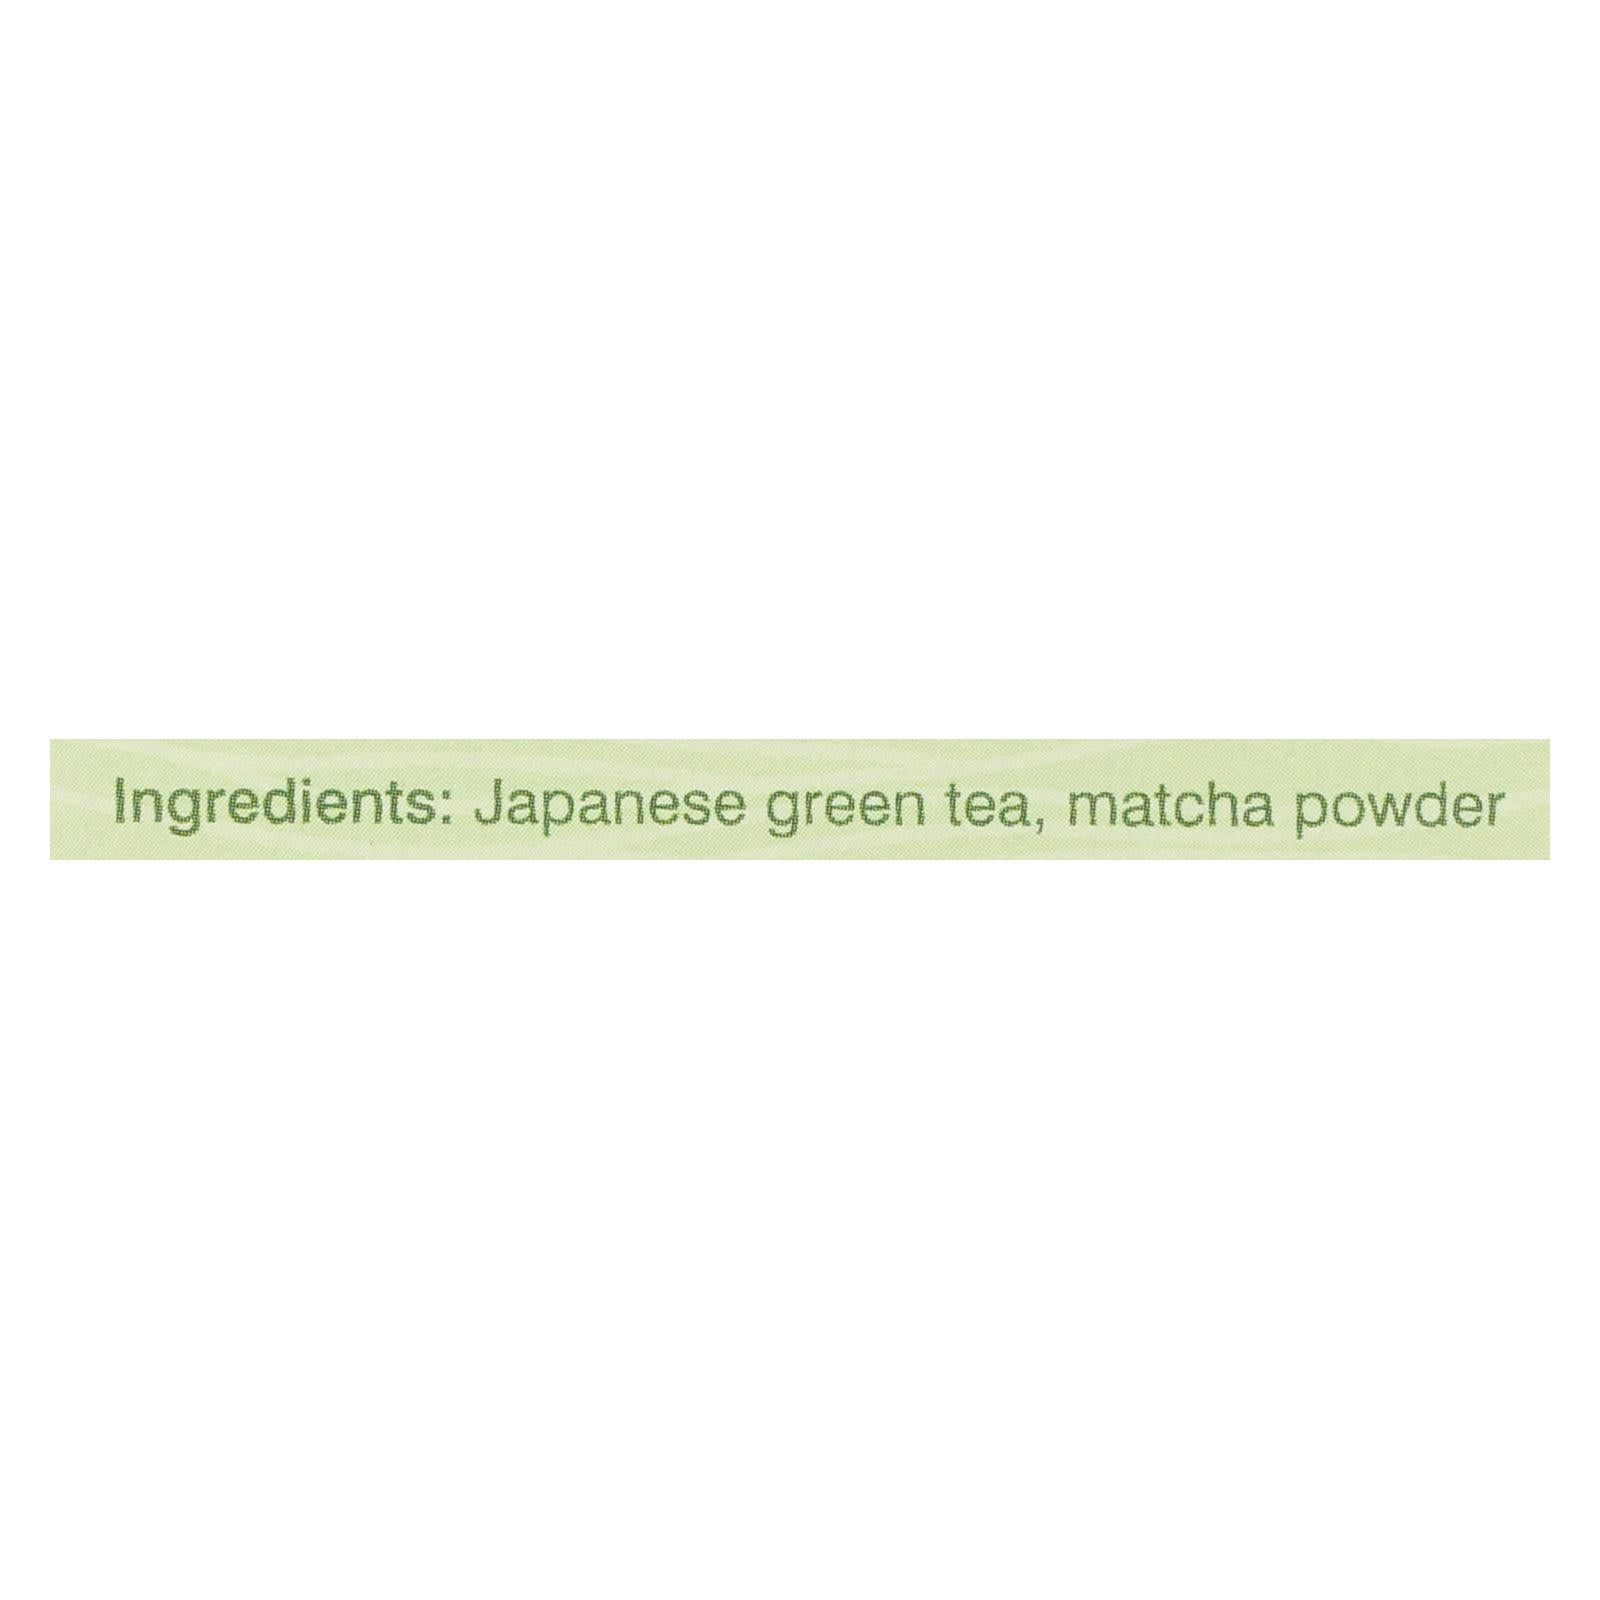 Matcha Love In Matcha Green Tea Traditional Flavor  - Case of 6 - 10 BAGS